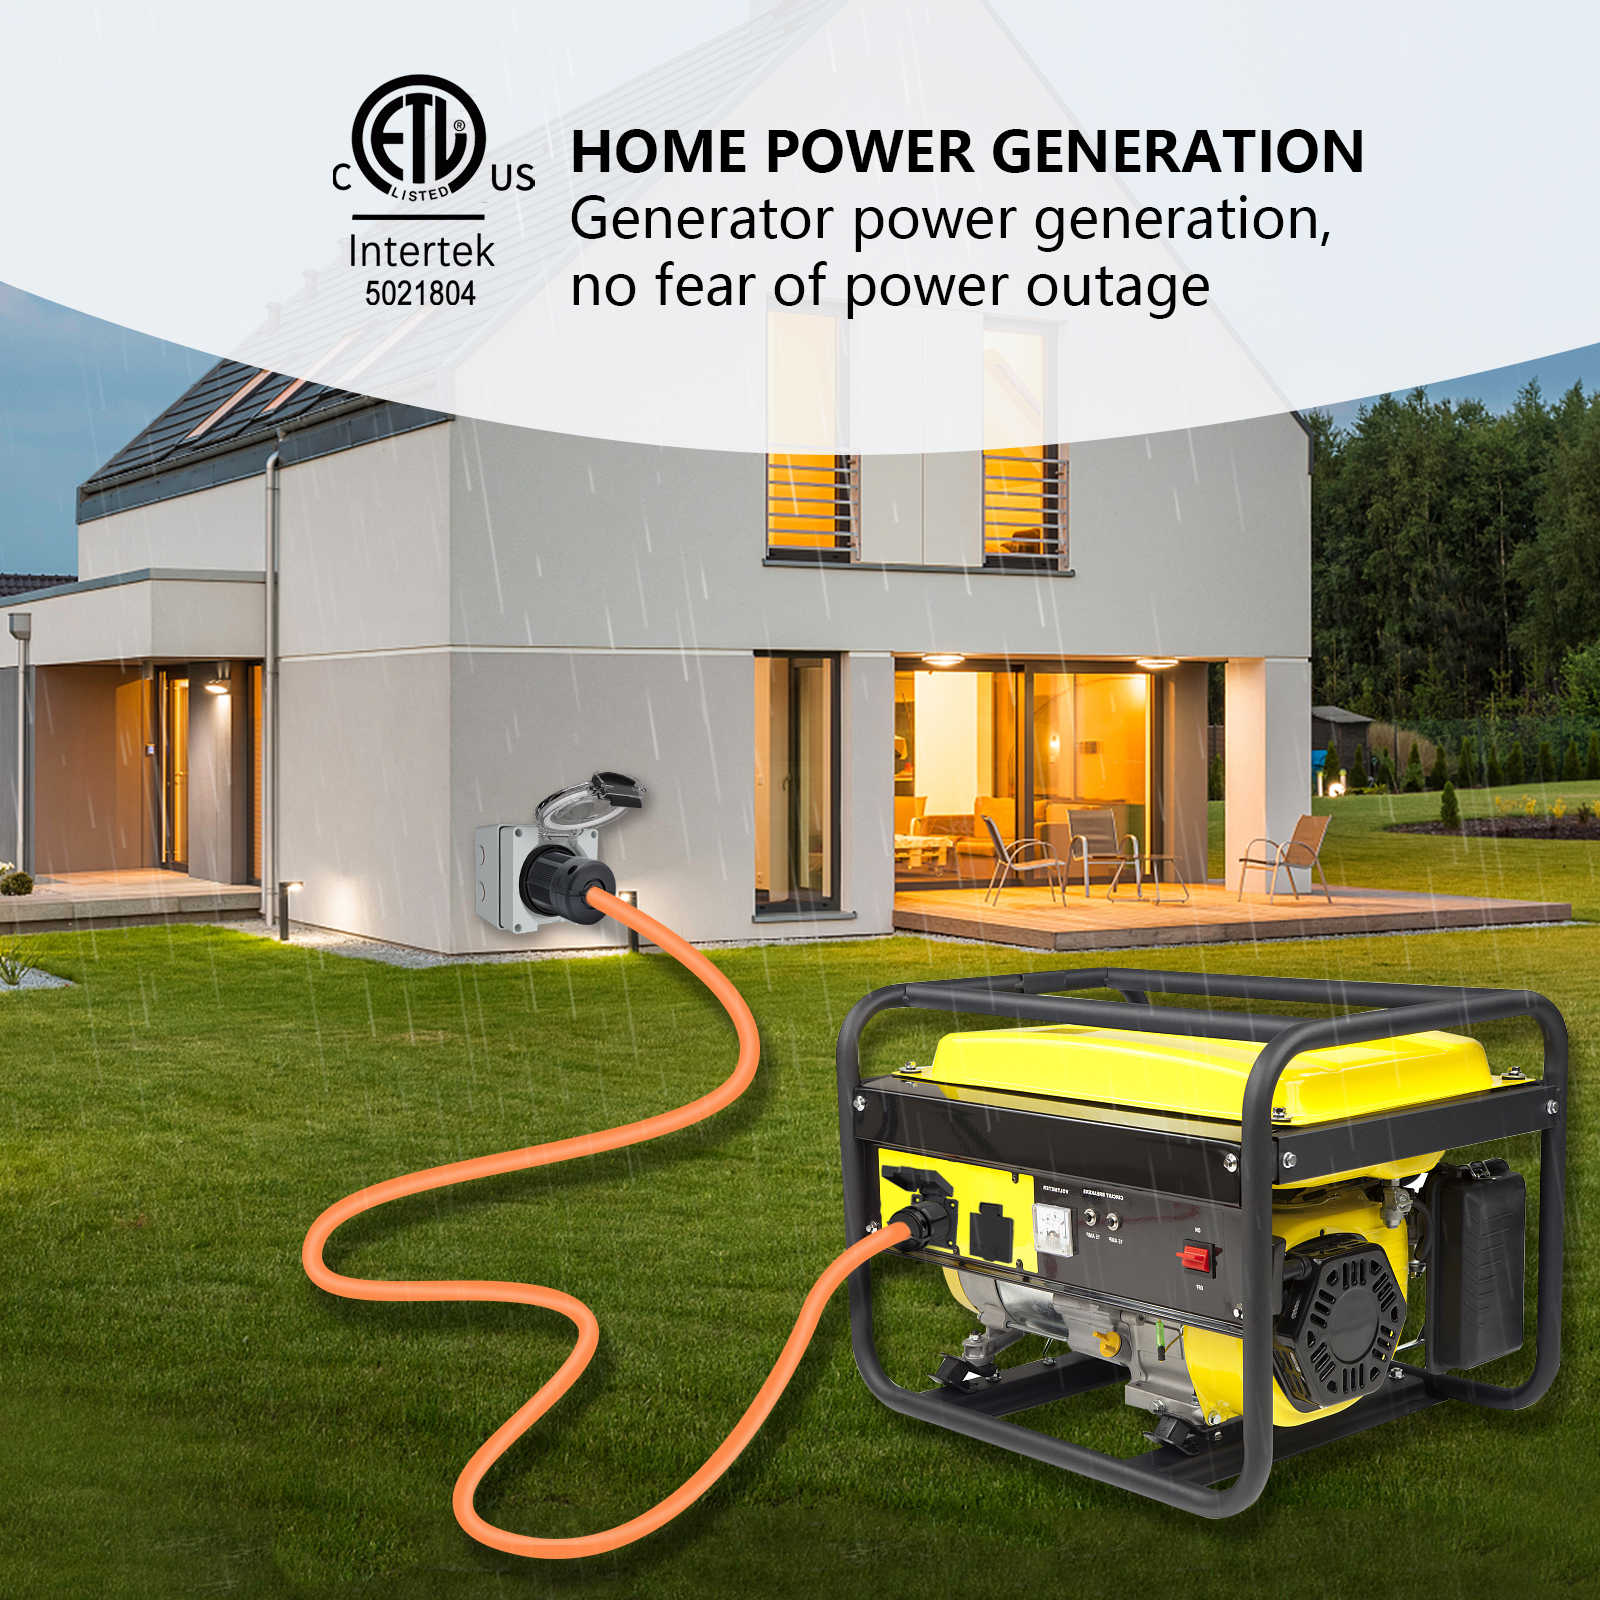 The L6-30P generator power inlet box can be used in homehold power genaration